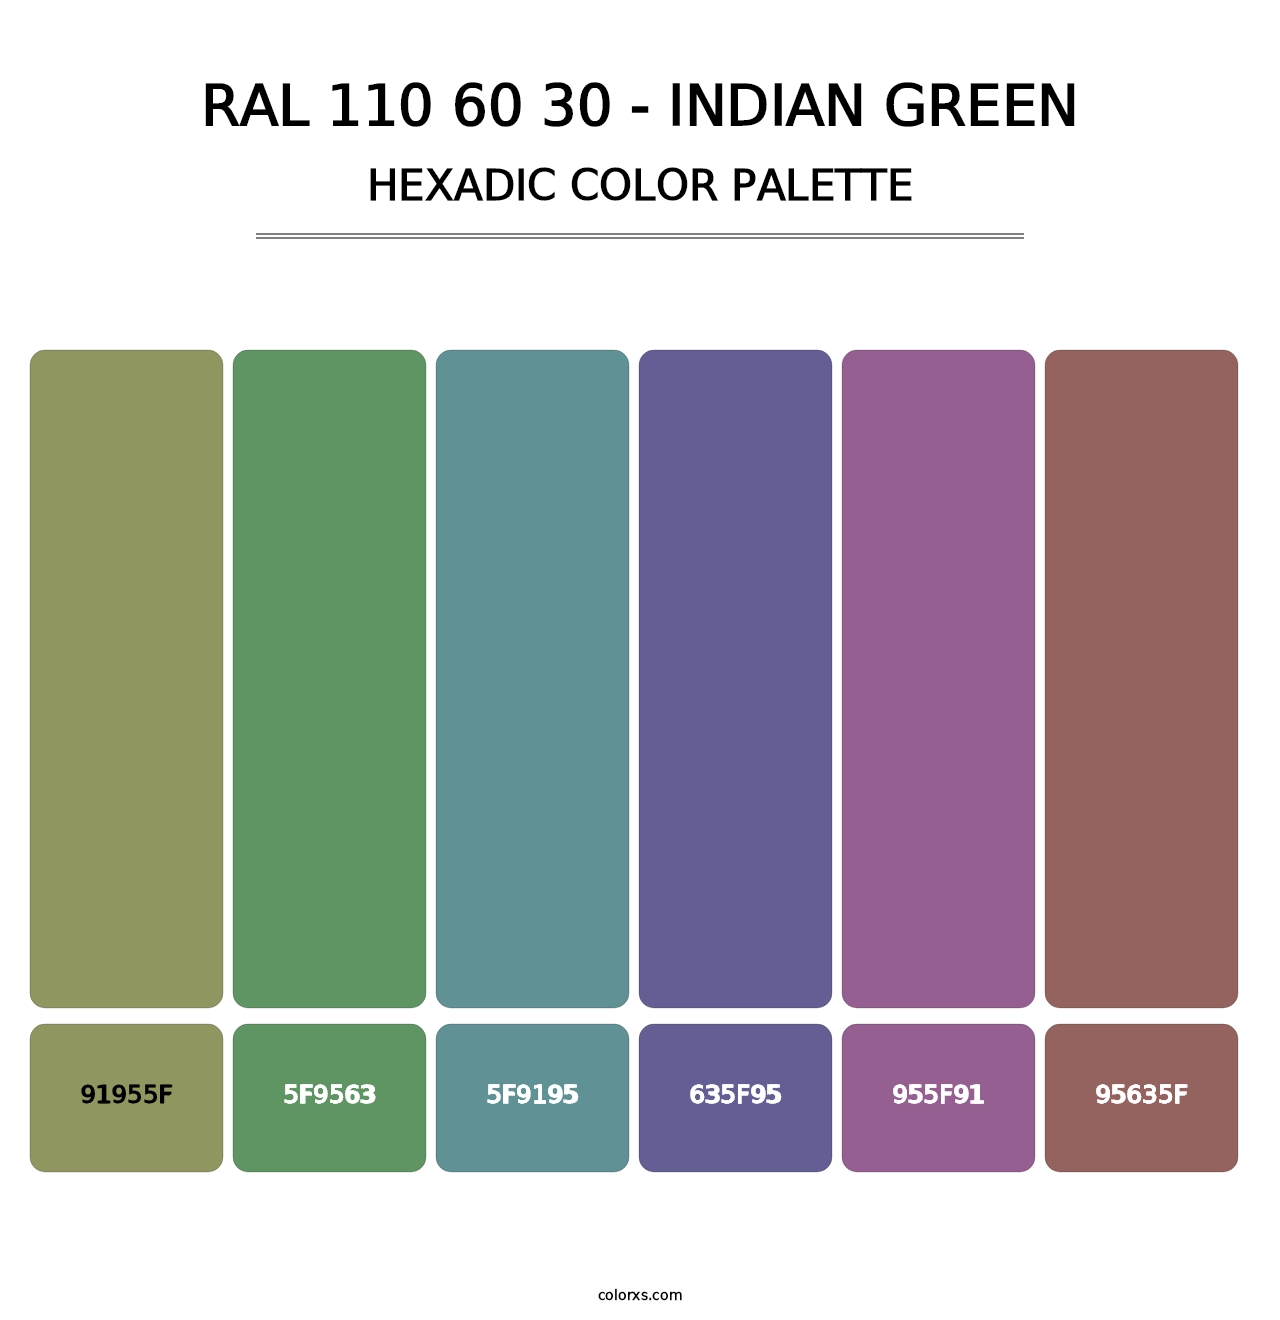 RAL 110 60 30 - Indian Green - Hexadic Color Palette